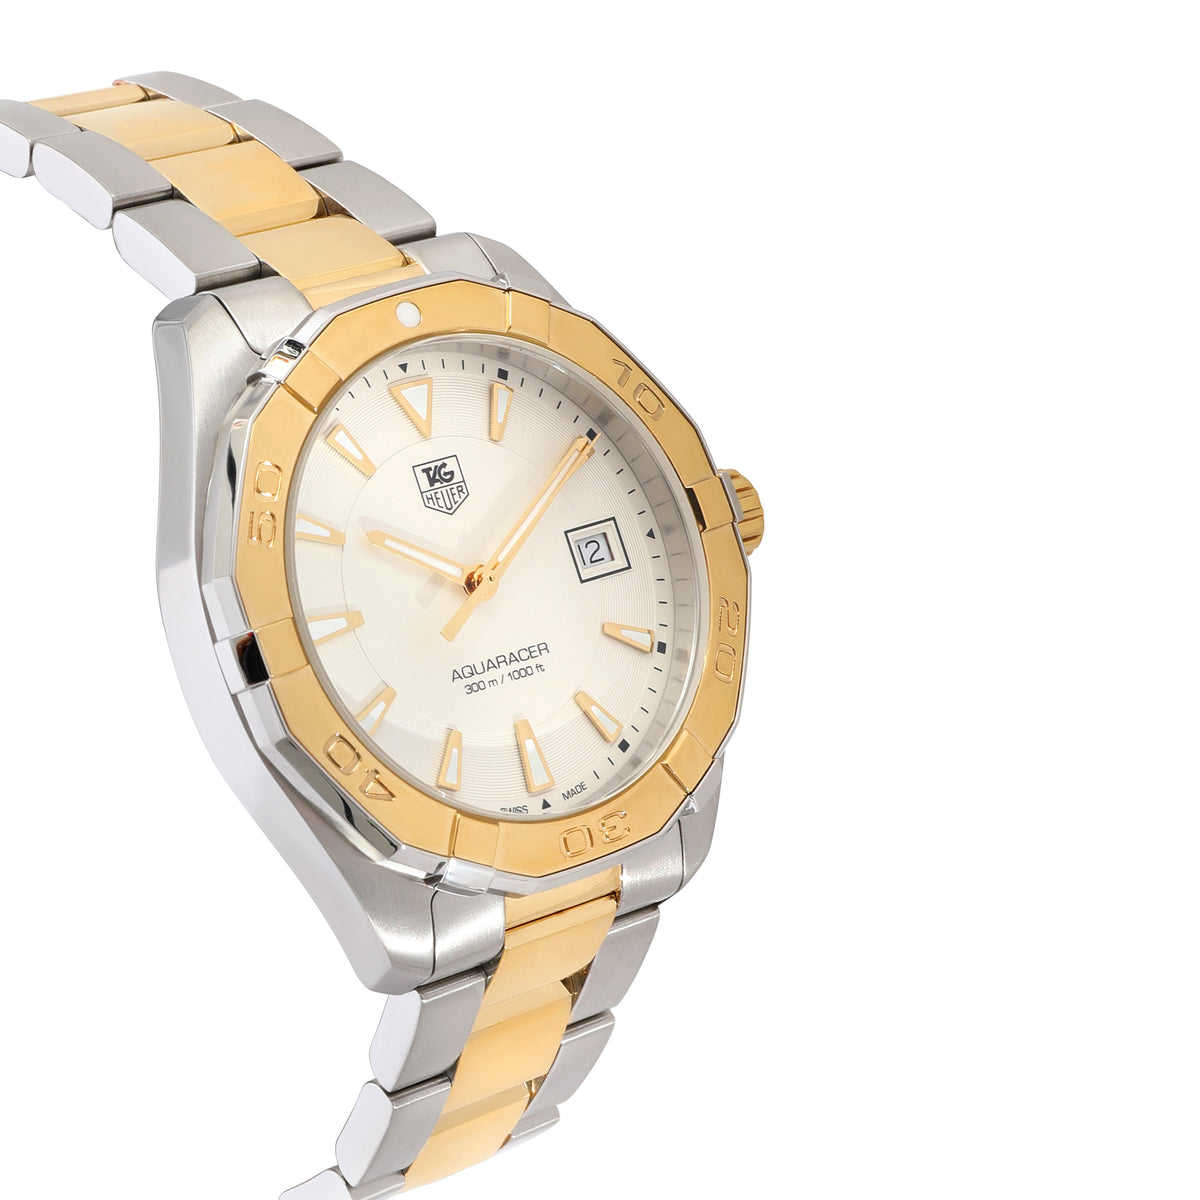 Tag Heuer Aquaracer WAY1120.BB0930 Men's Watch in Stainless Steel/Gold Plated